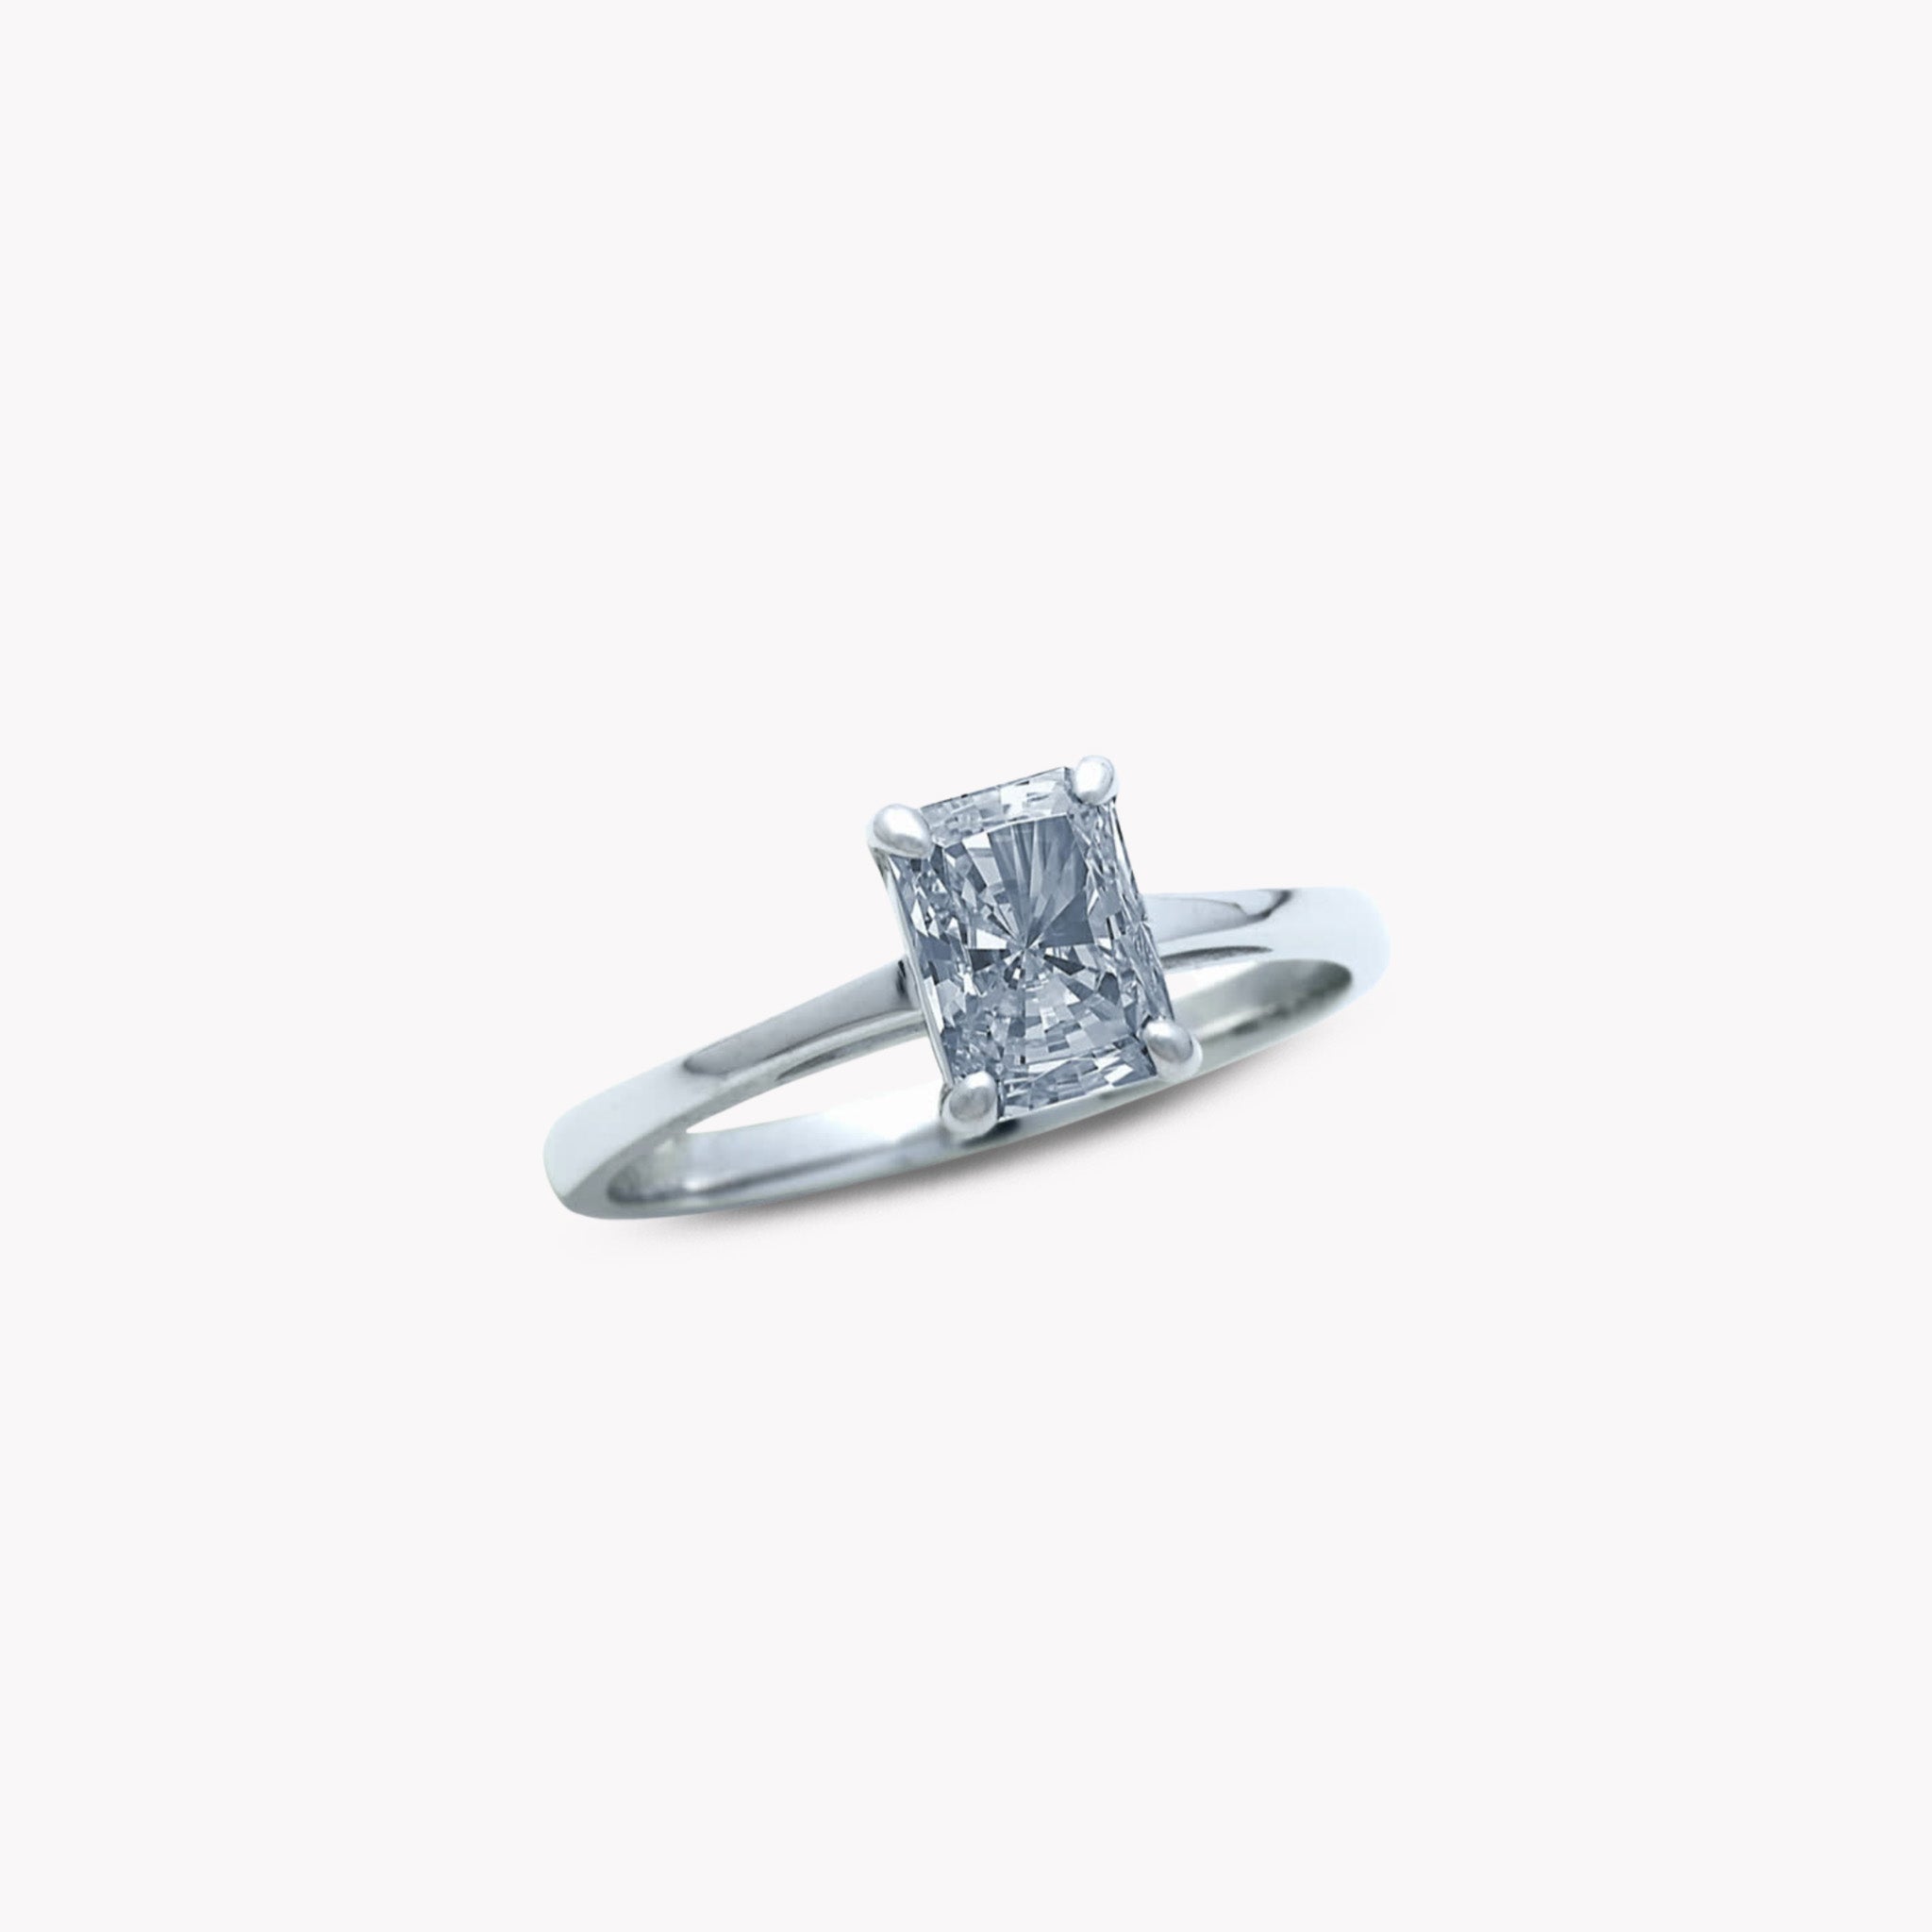 4 Prong Solitaire Ring